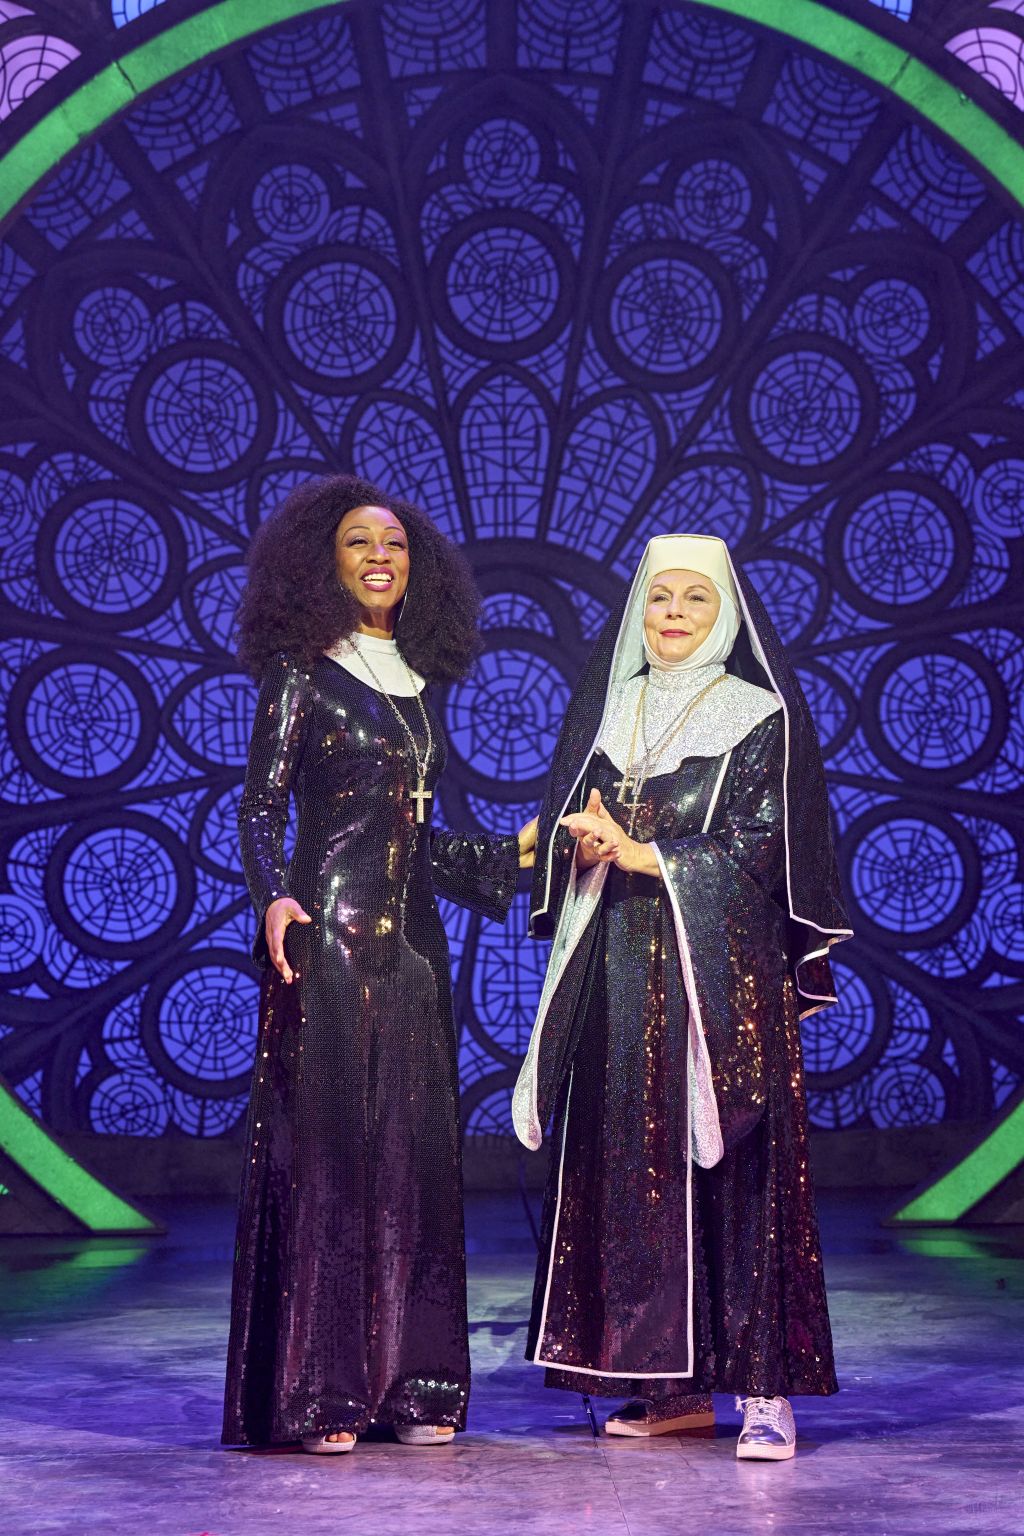 Beverley Knight and Jennifer Saunders in 'Sister Act'